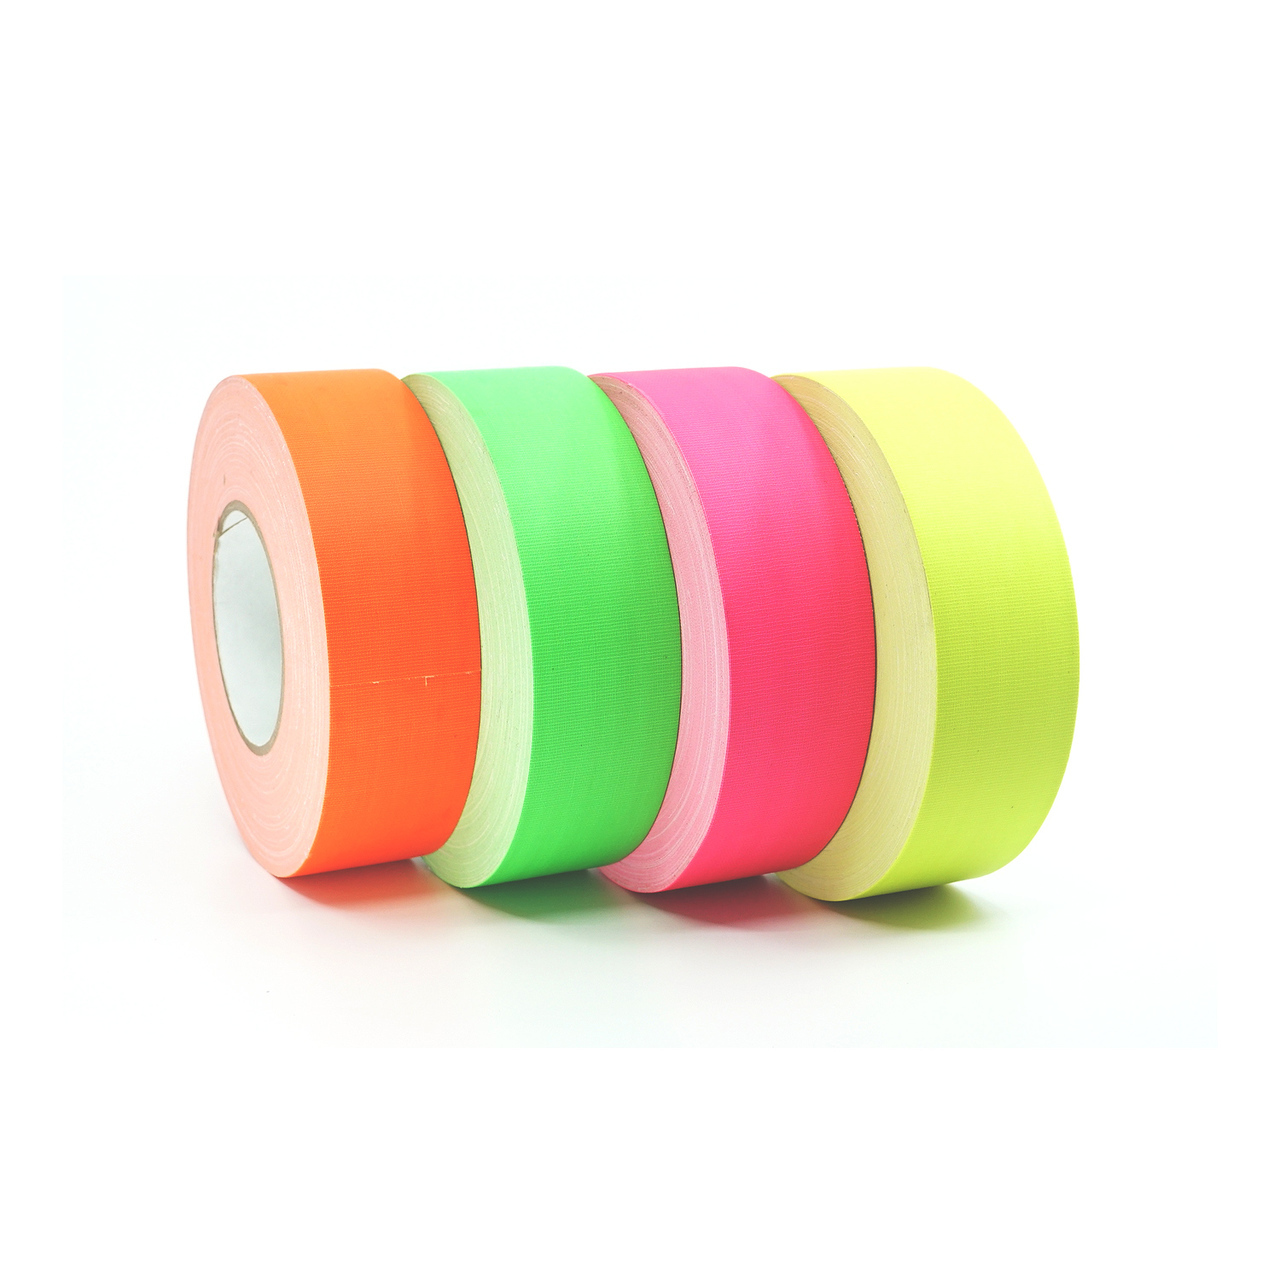 Top 3 Waterproof Tapes: 2019 Buying Guide - Tape Jungle